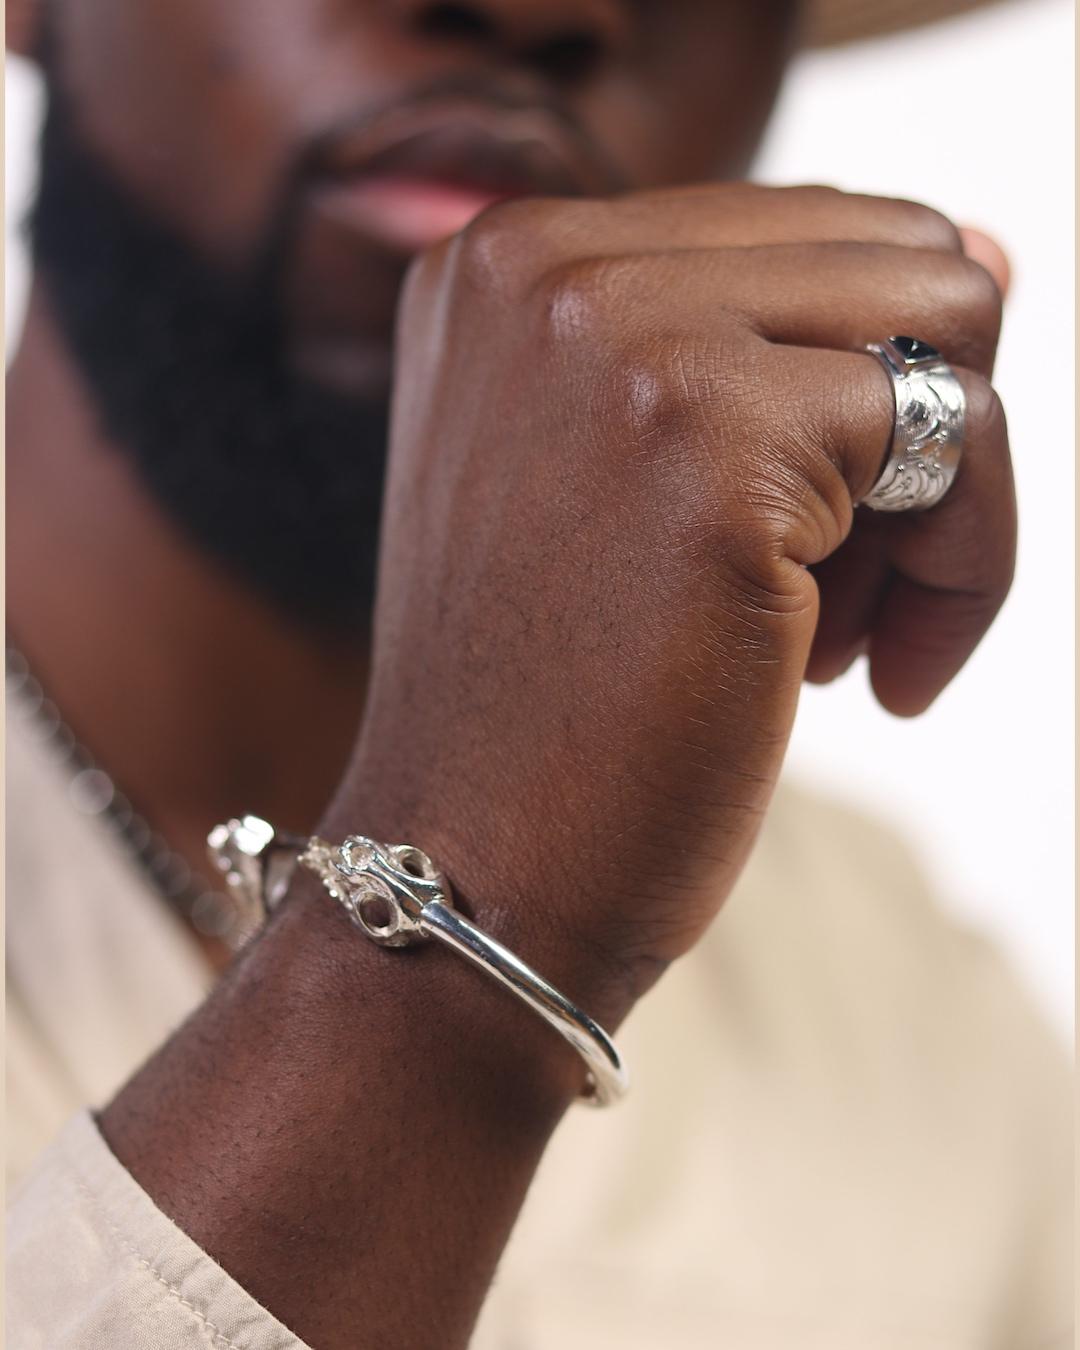 Ibibio (Leopard) Twin Skull Cuff
925 Sterling Silver
Handcrafted

Raymond Egbo, a New York born designer and creator of Afro-Inspired fine jewelry and accessories. This drive to cultivate a presence that unifies the world and Afro-Culture through